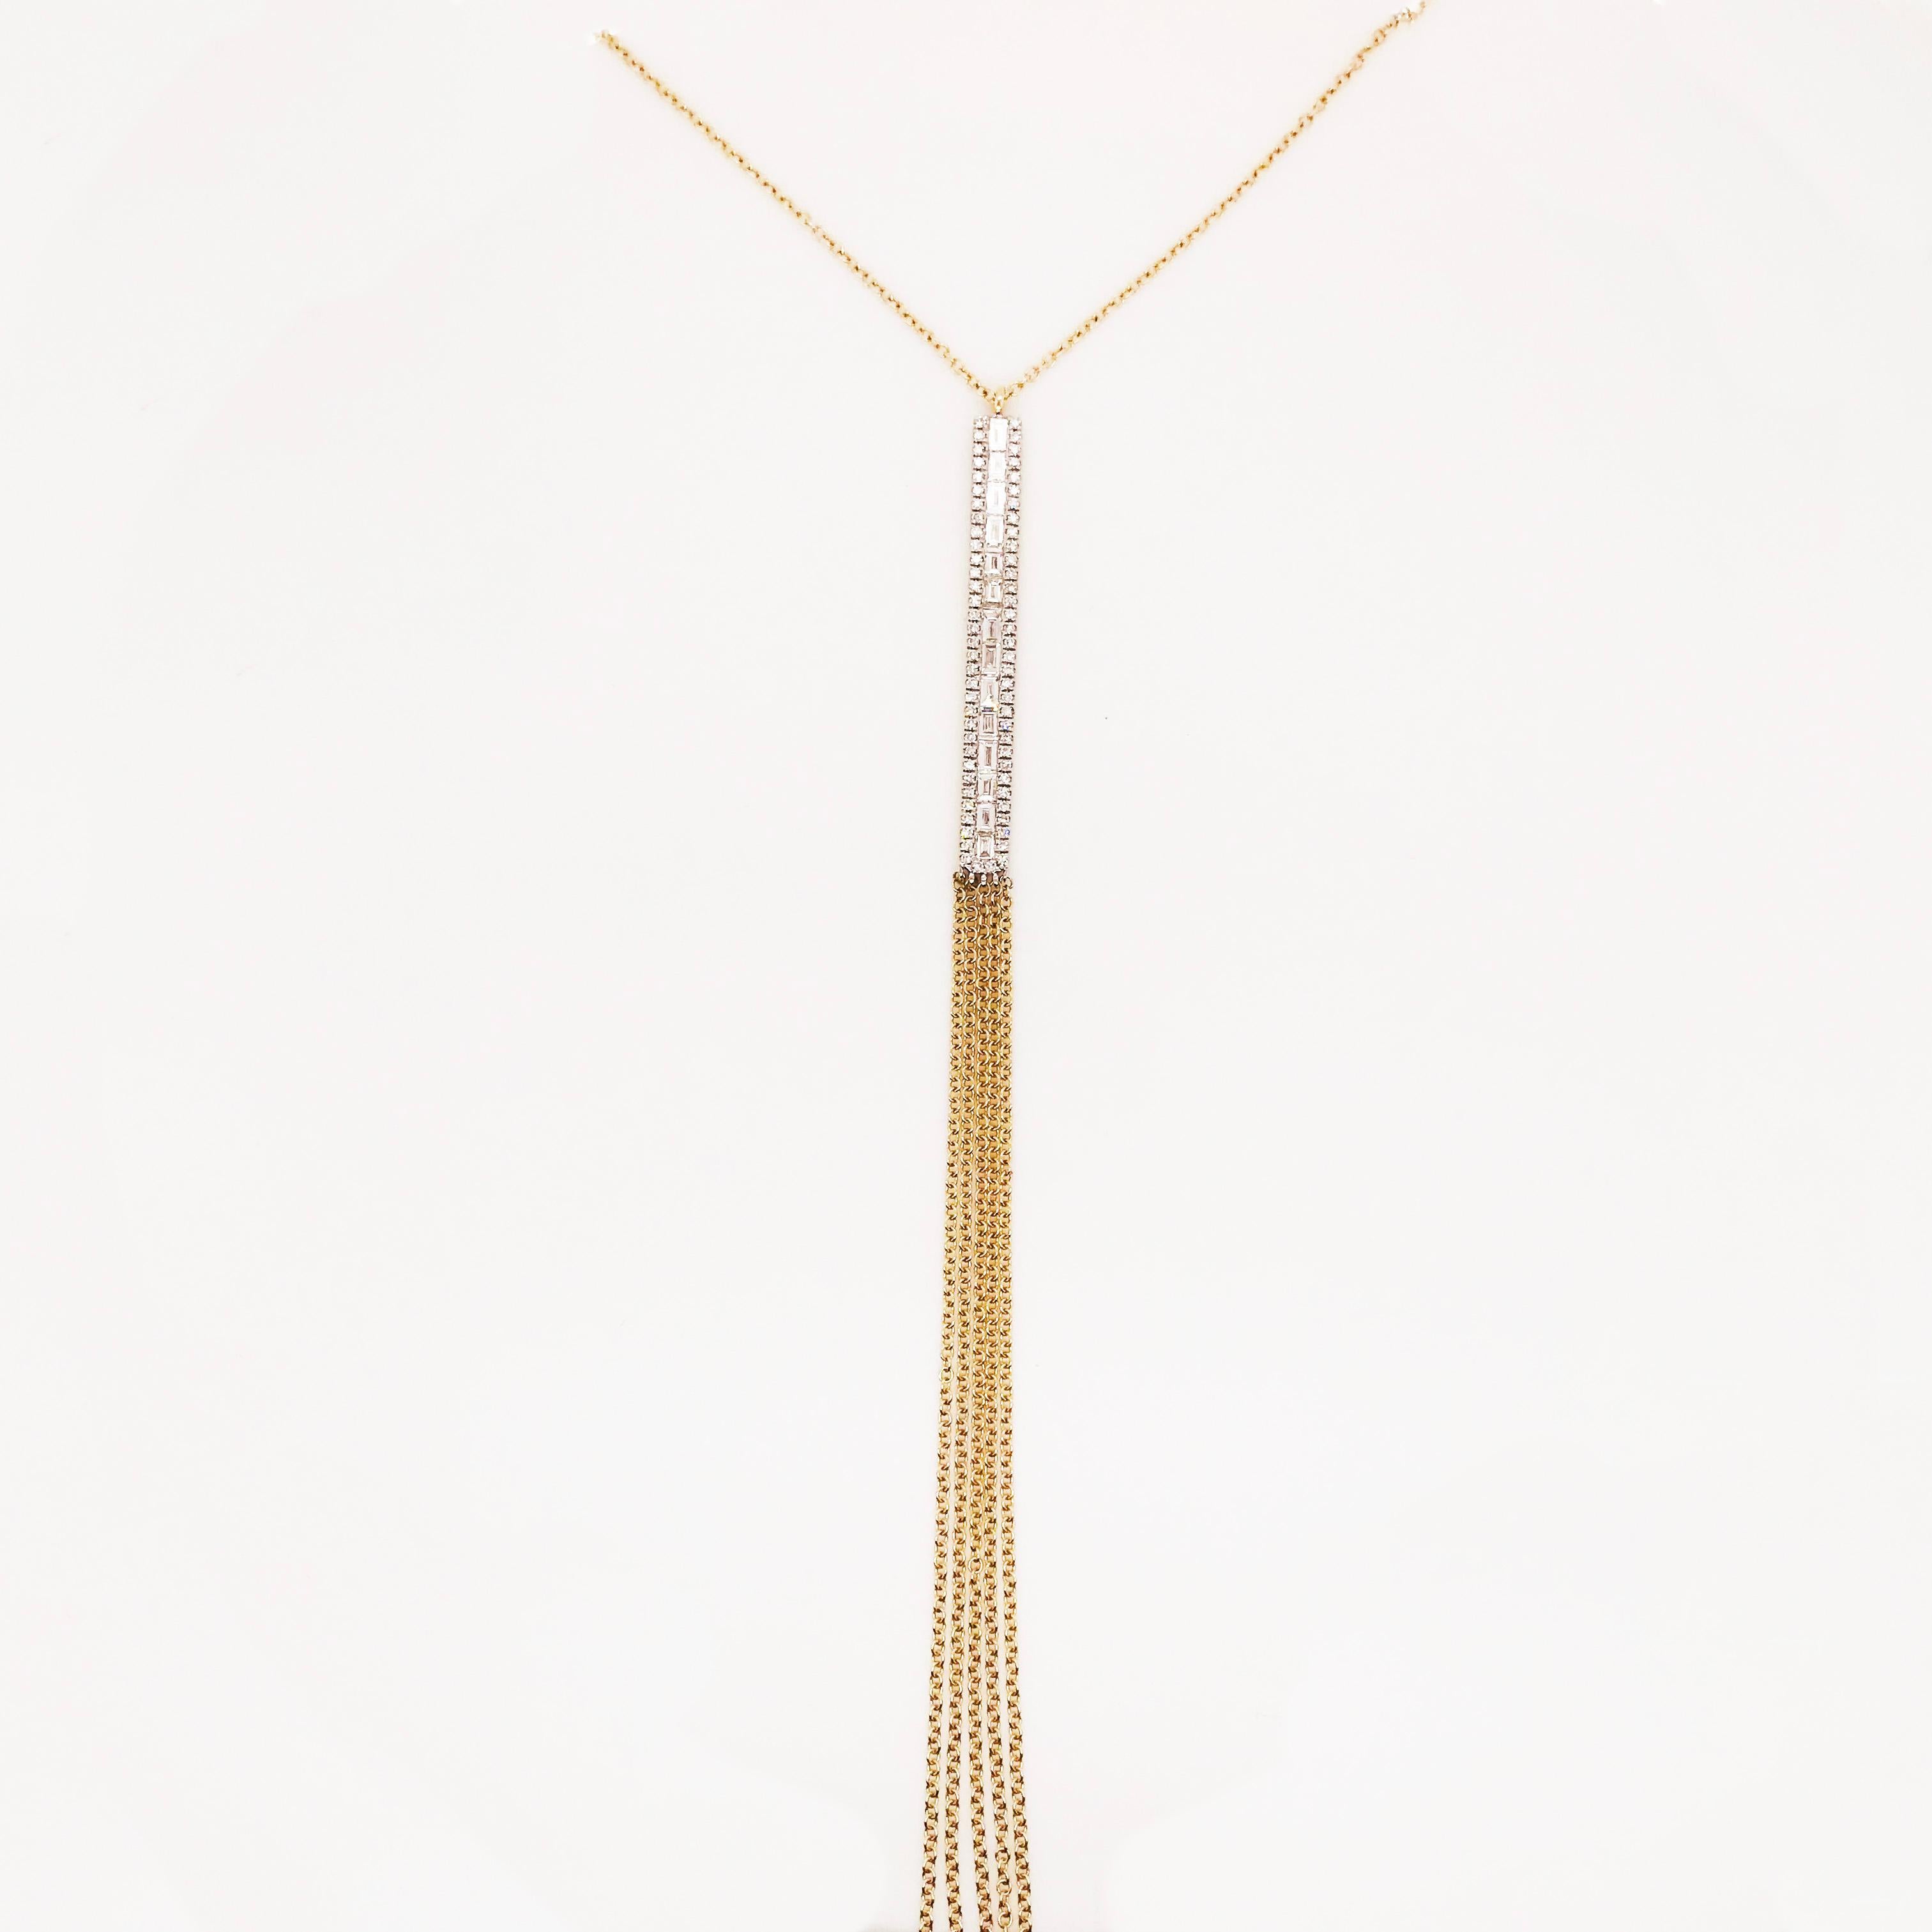 This 14K Yellow Gold Necklace w Chain Tassel is very sexy.  Everything about this necklace is dazzling!  The chain can be worn close to the neck but the tassels makes your eyes move down and draw attention to the bodice of a woman.  The chain is